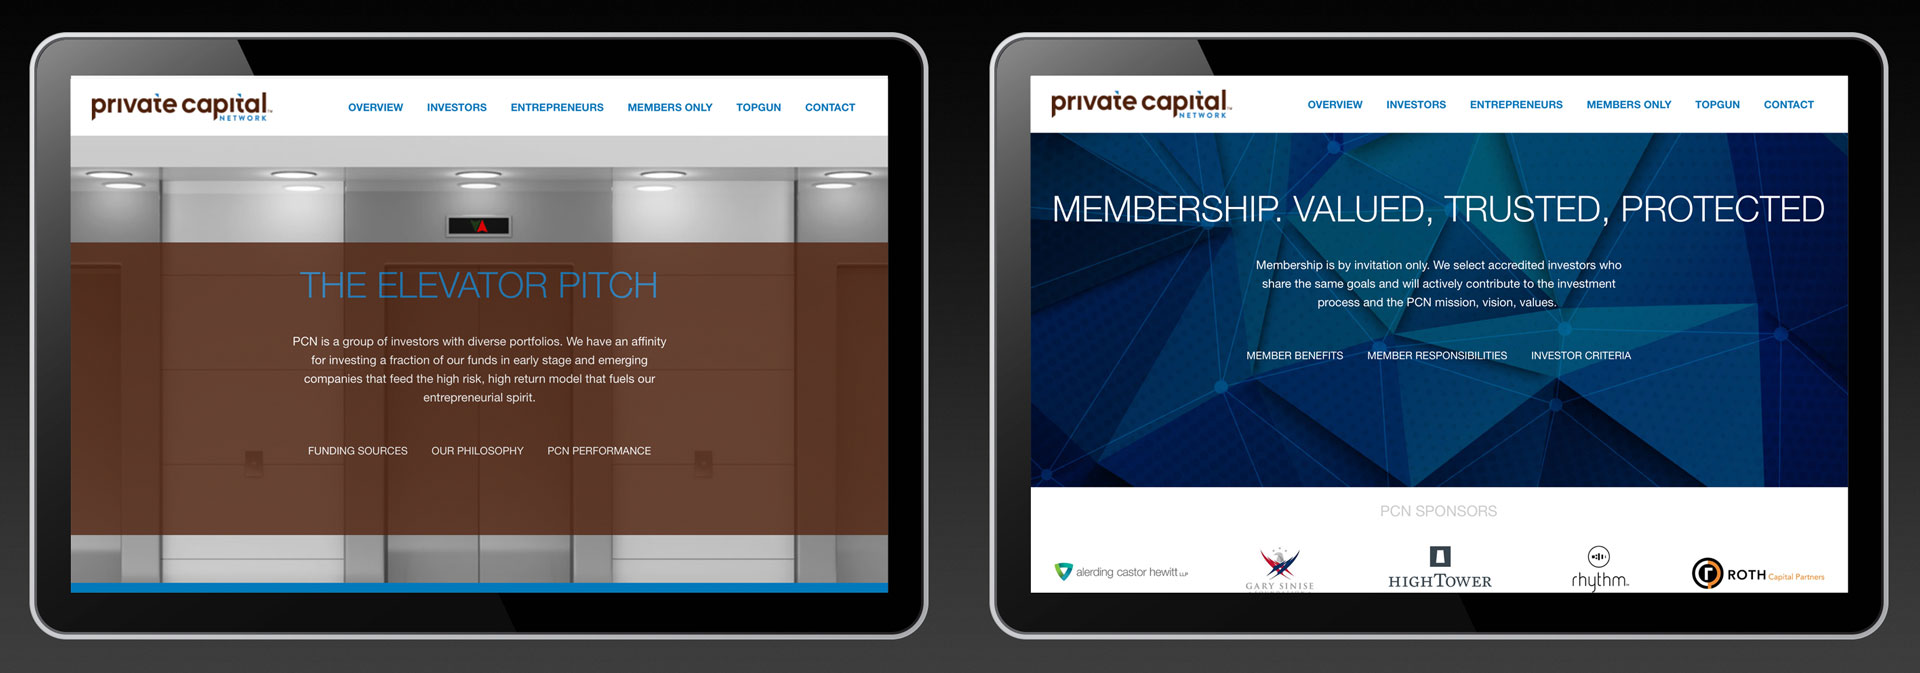 private capital network website on ipads